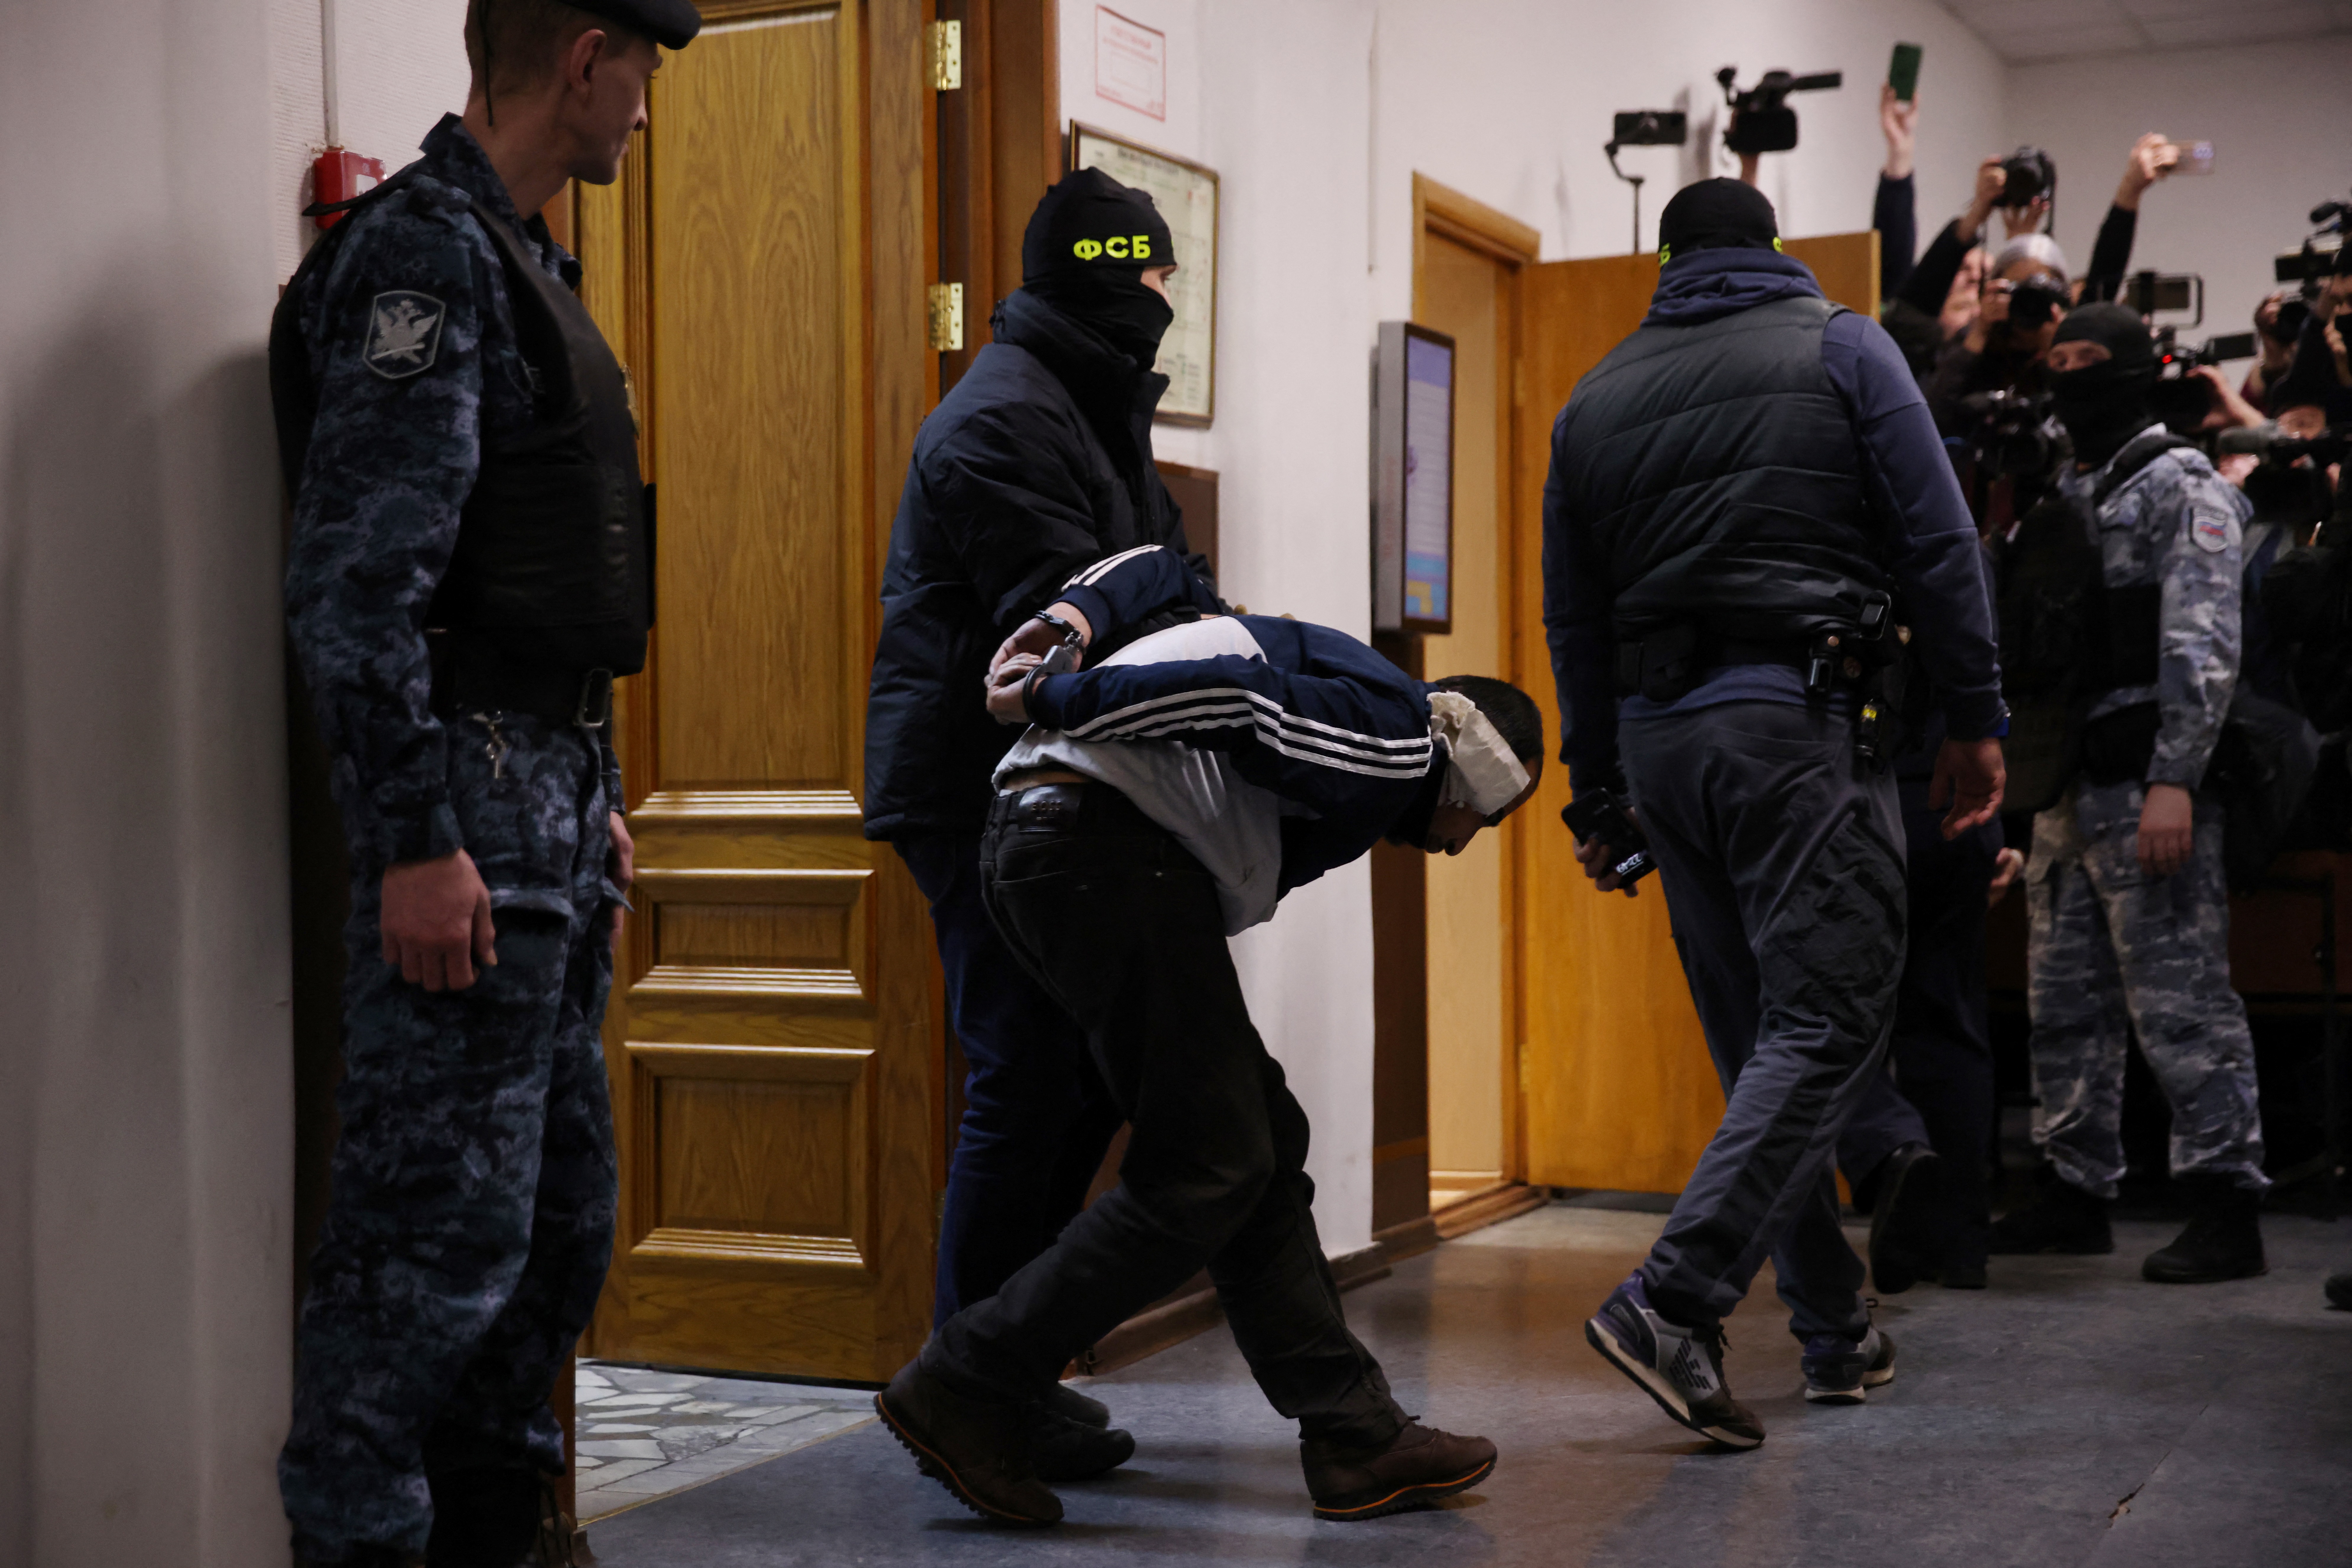 Terrorism charge filed vs 4 suspects in Russia concert attack